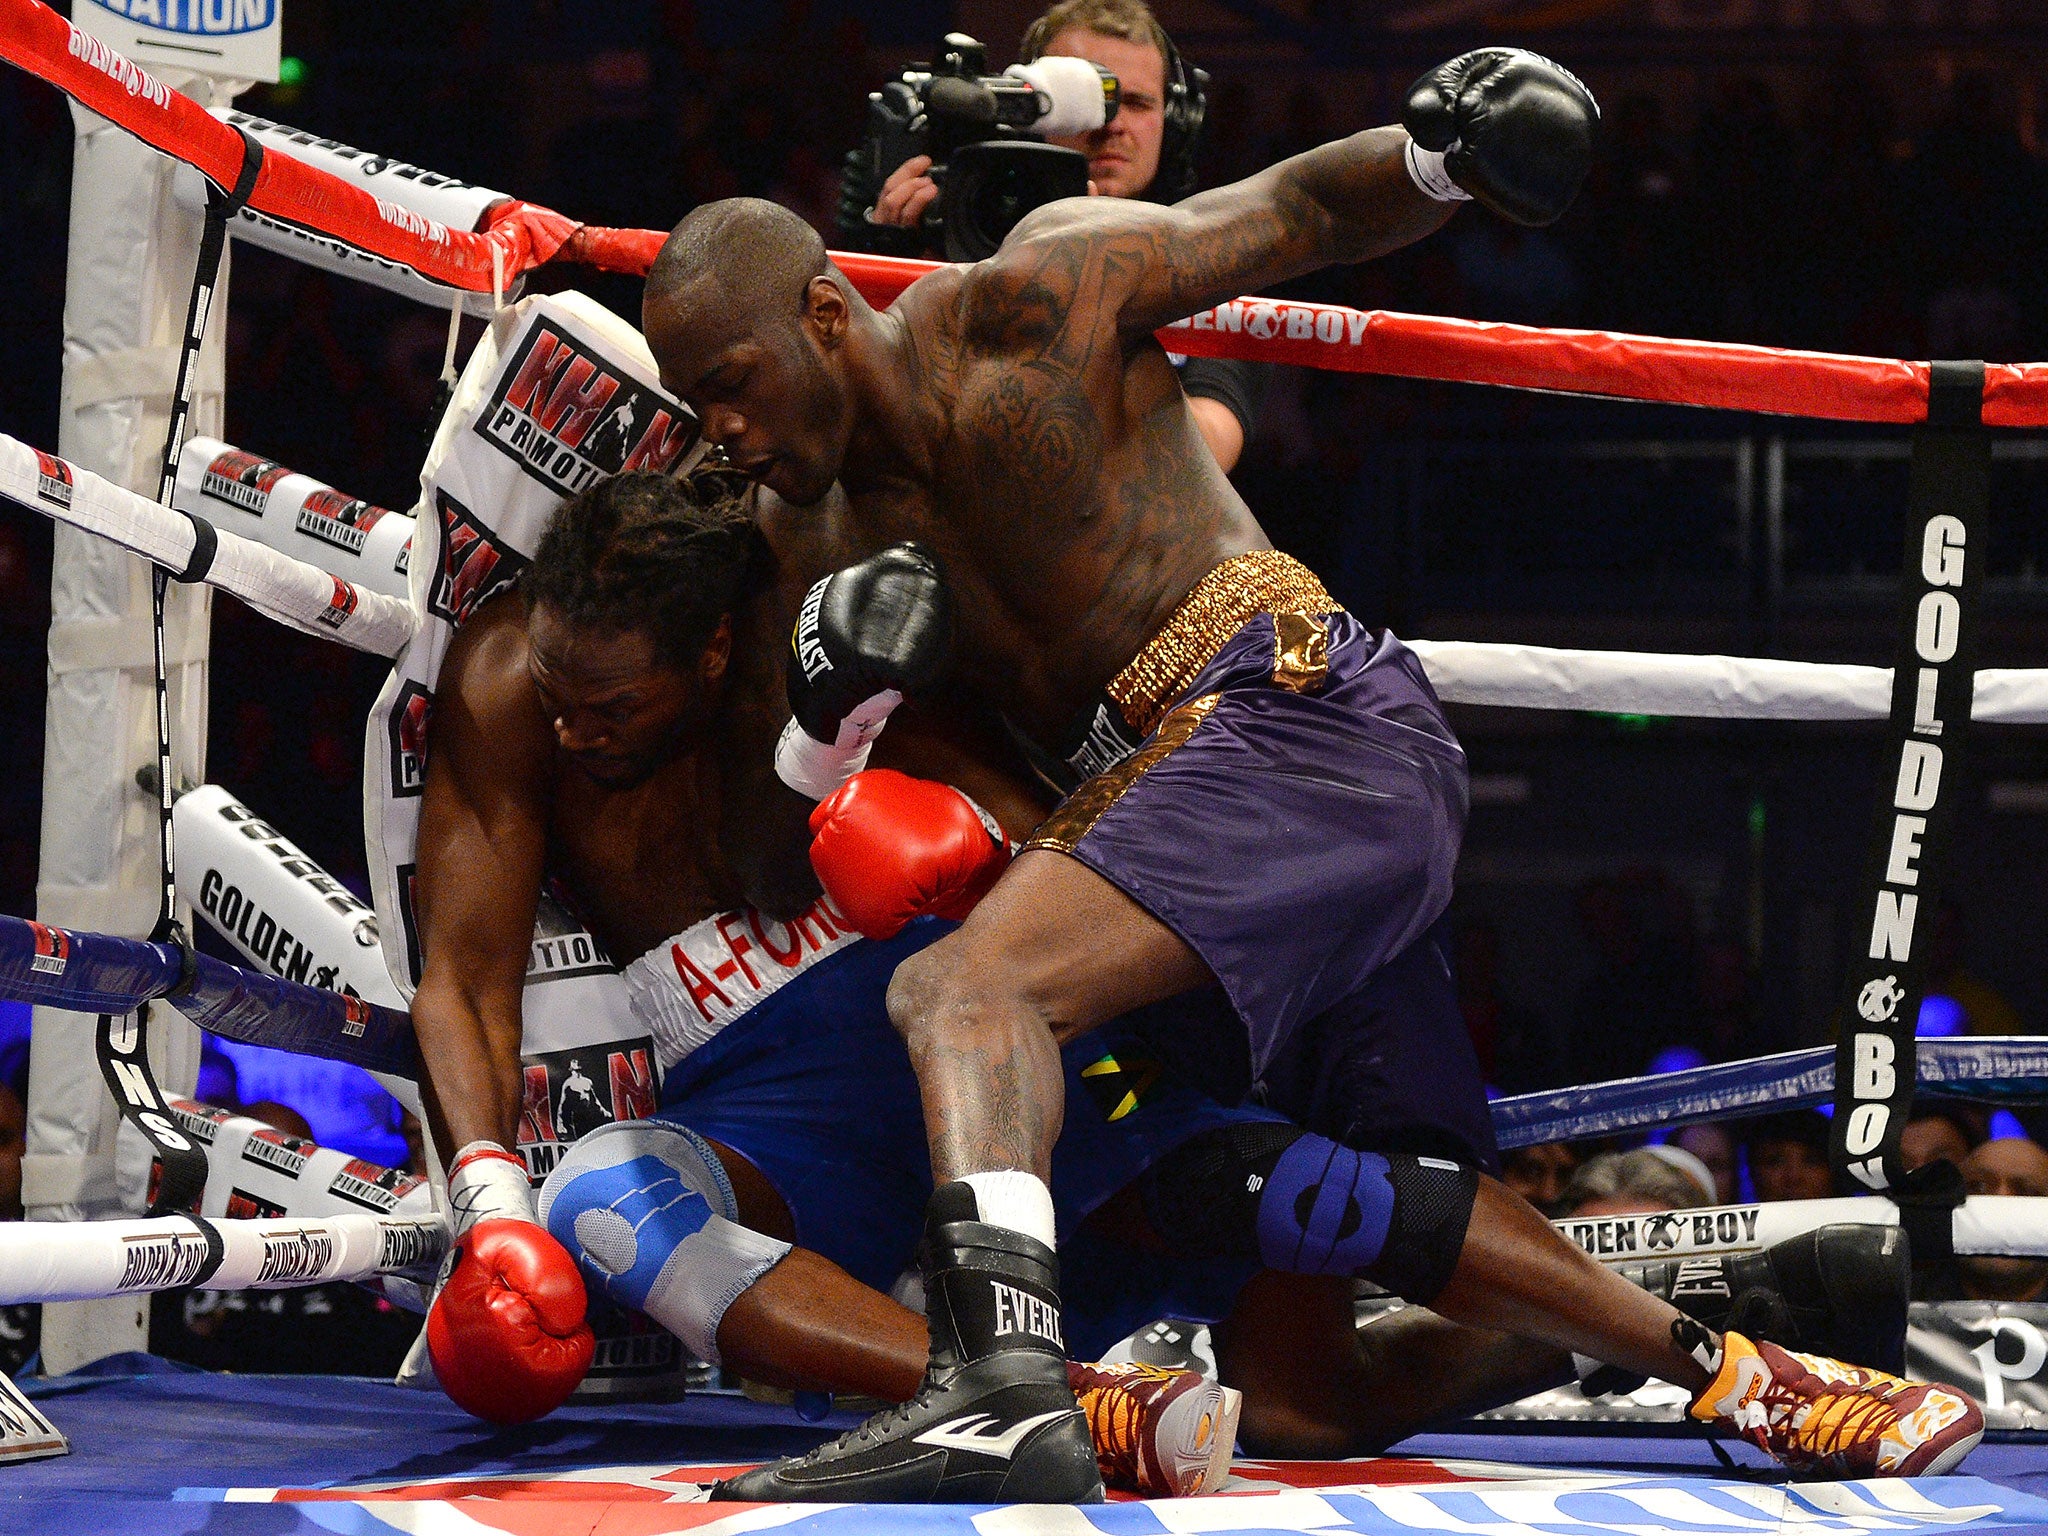 Deontay Wilder makes short work of Audley Harrison